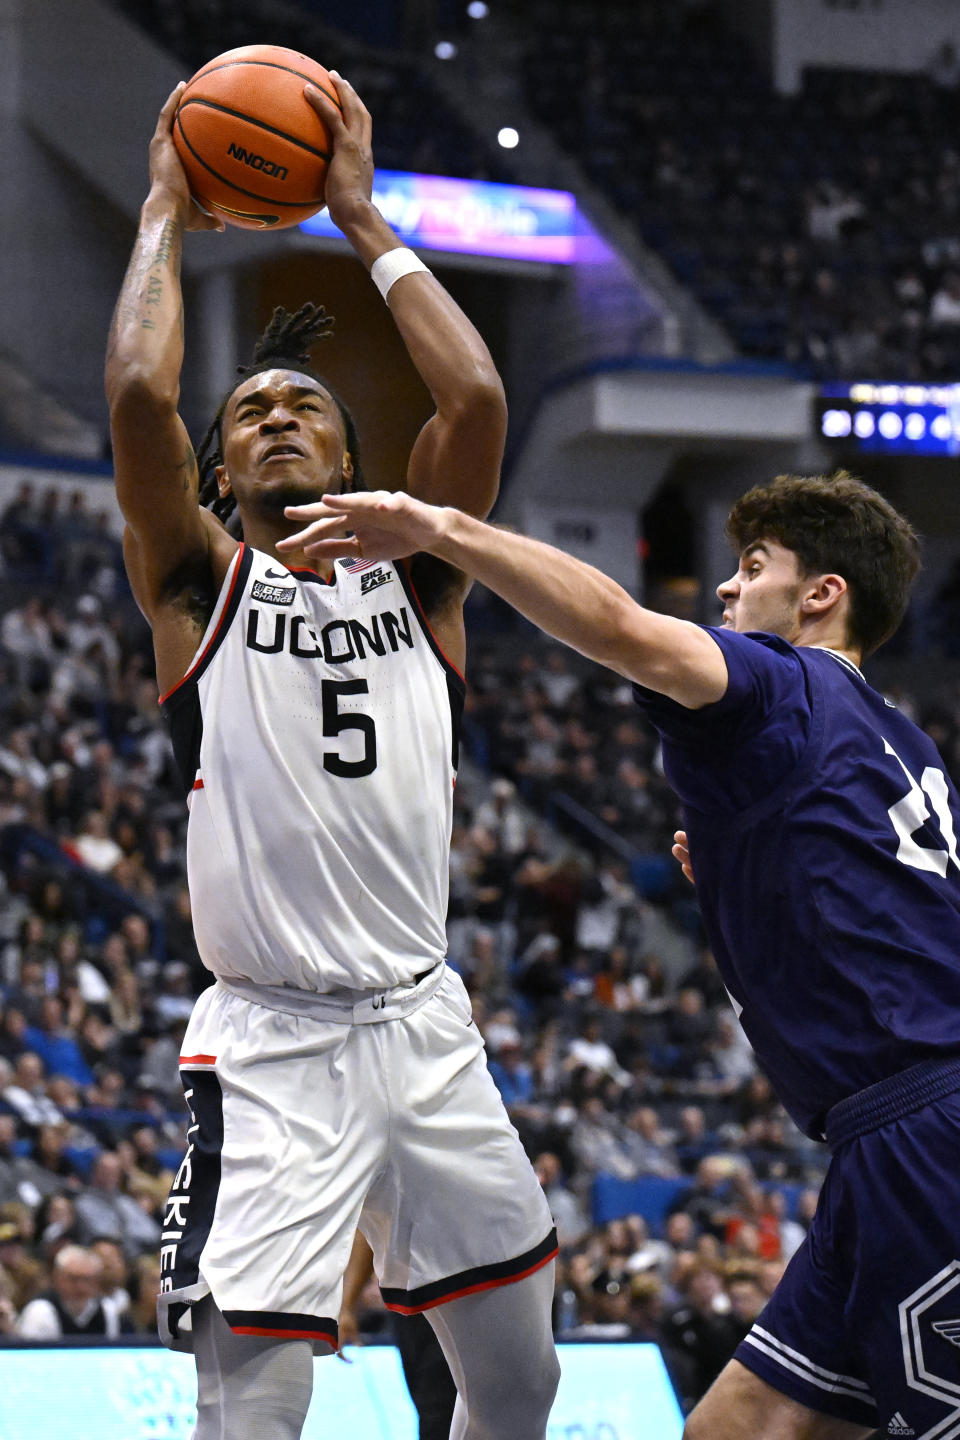 UConn's Stephon Castle shoots as Stonehill's Todd Brogna defends in the second half of an NCAA college basketball game, Saturday, Nov. 11, 2023, in Hartford, Conn. (AP Photo/Jessica Hill)